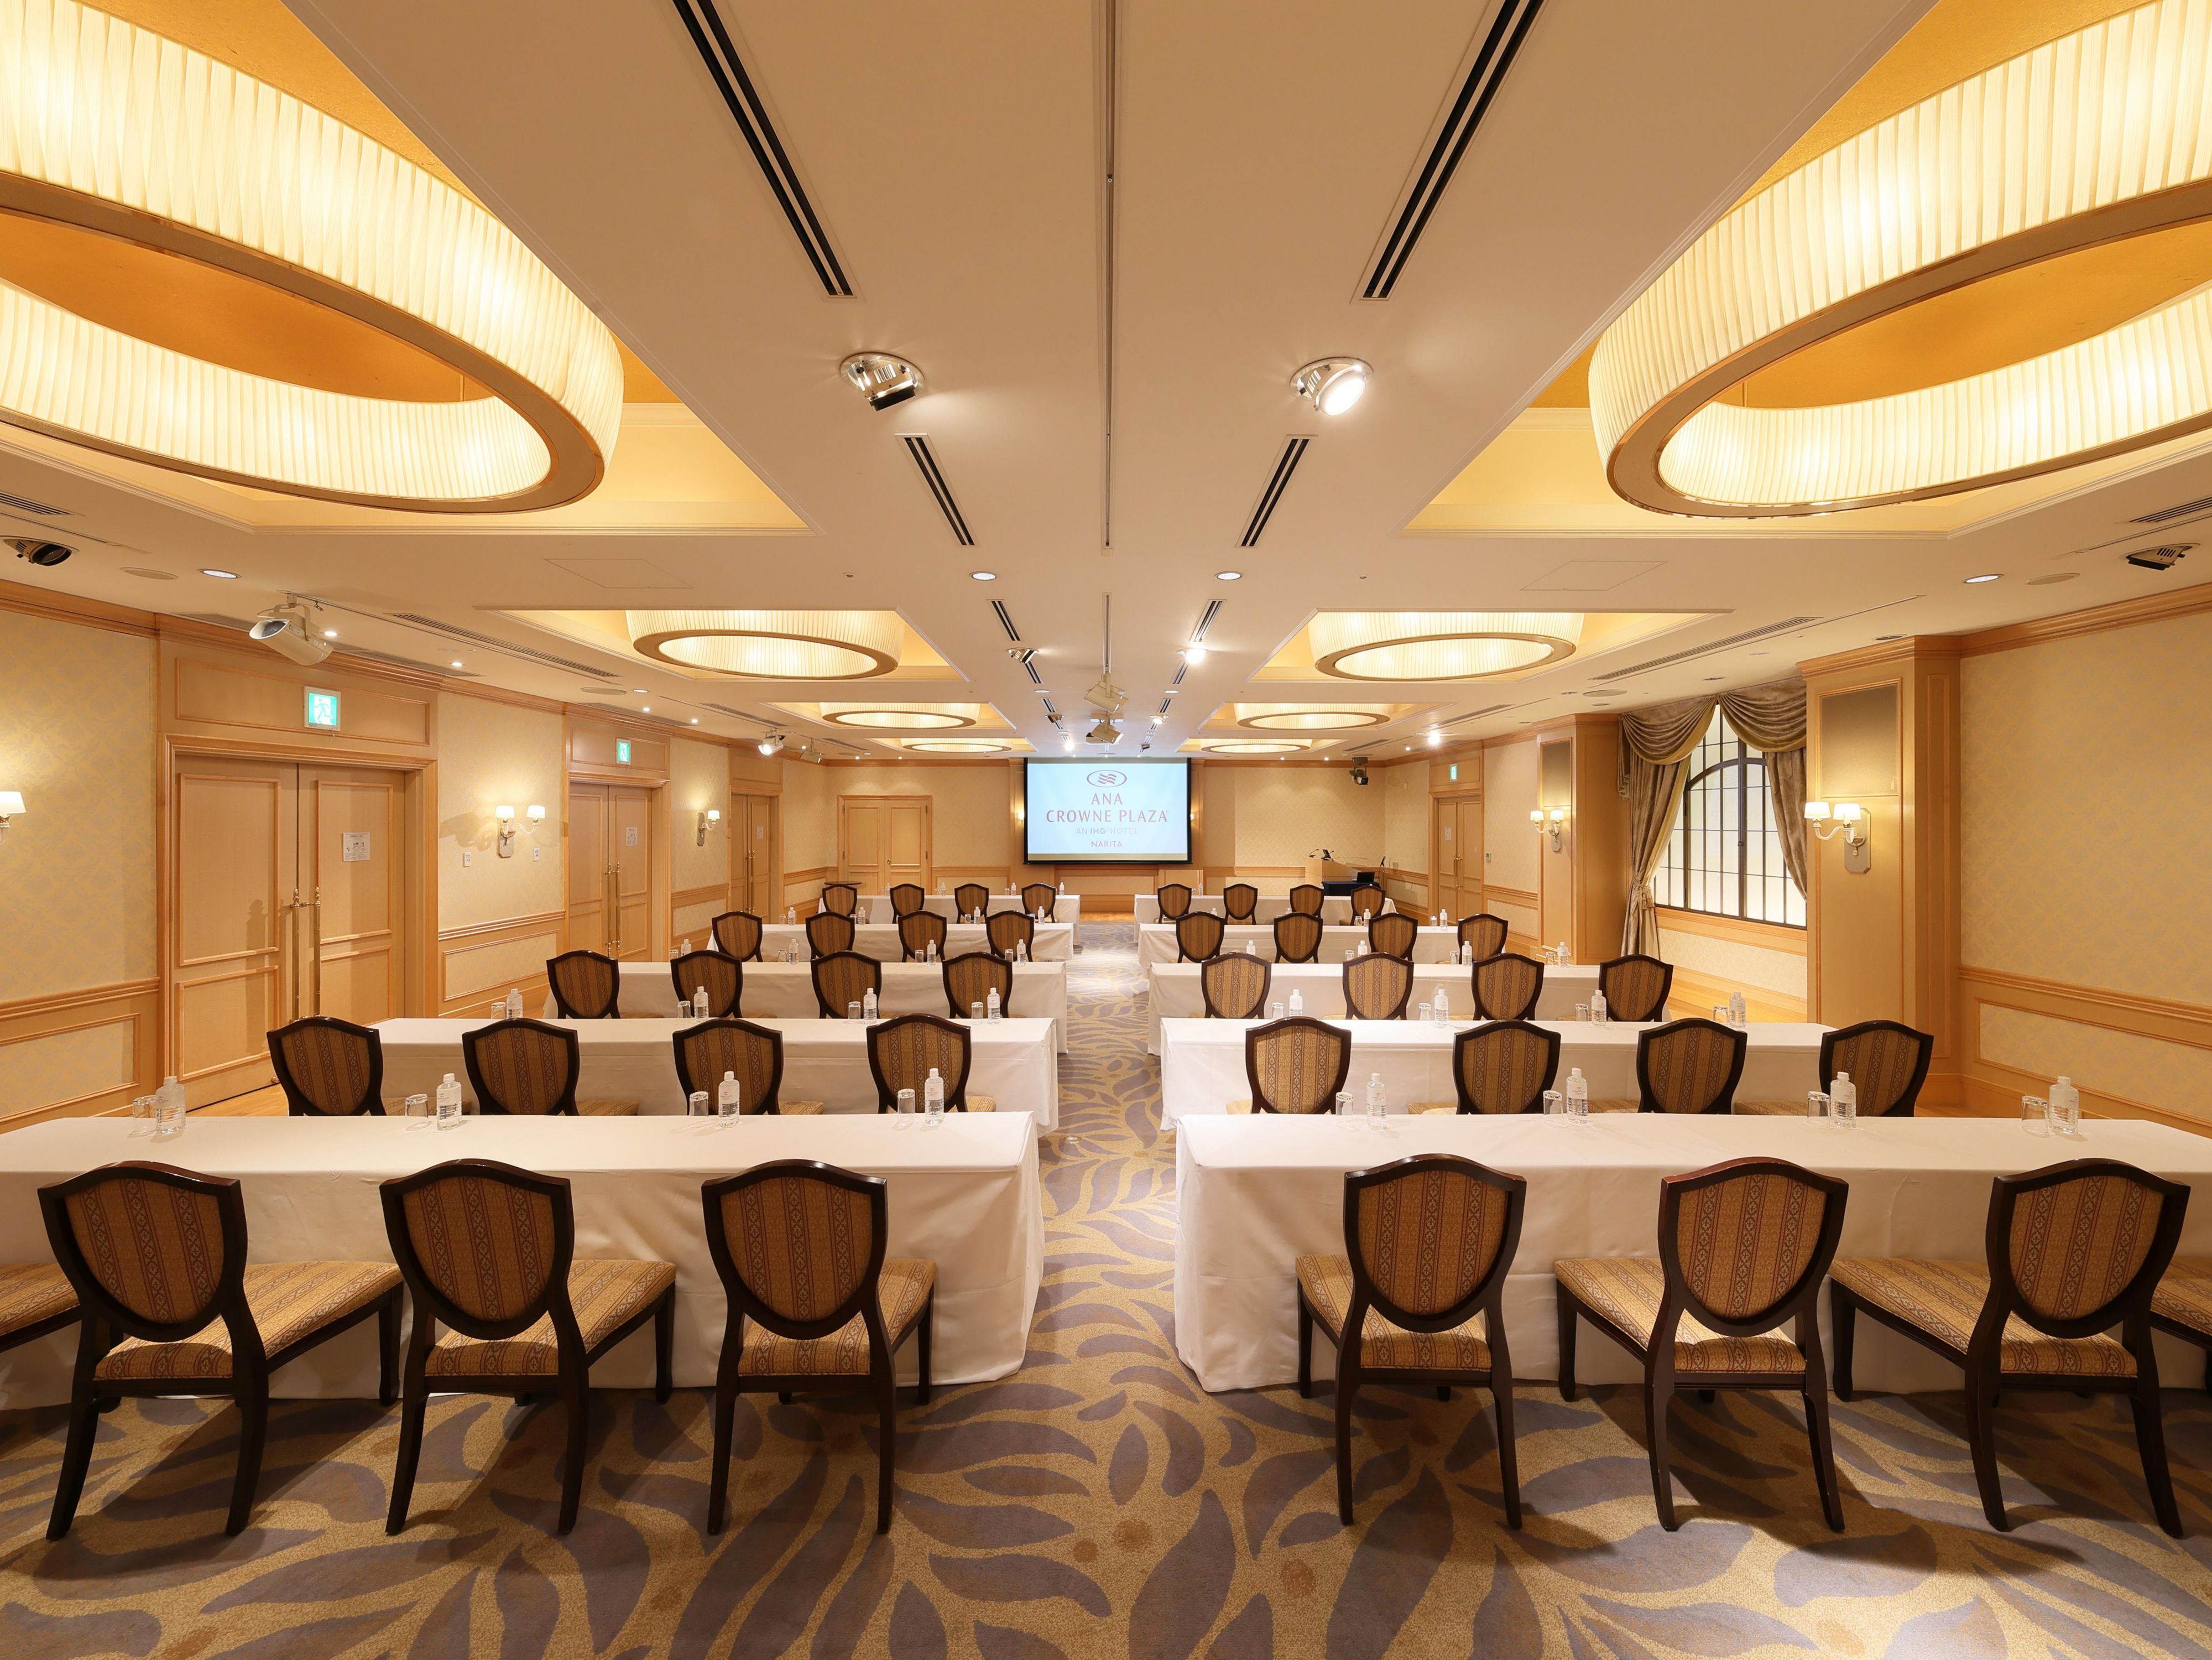 From large function rooms that can accommodate 500 guests to small rooms, our flexible spaces and variety of catering options can be customized to suit all of your conference or event needs. 
Our professional team will be with you every step of the way.